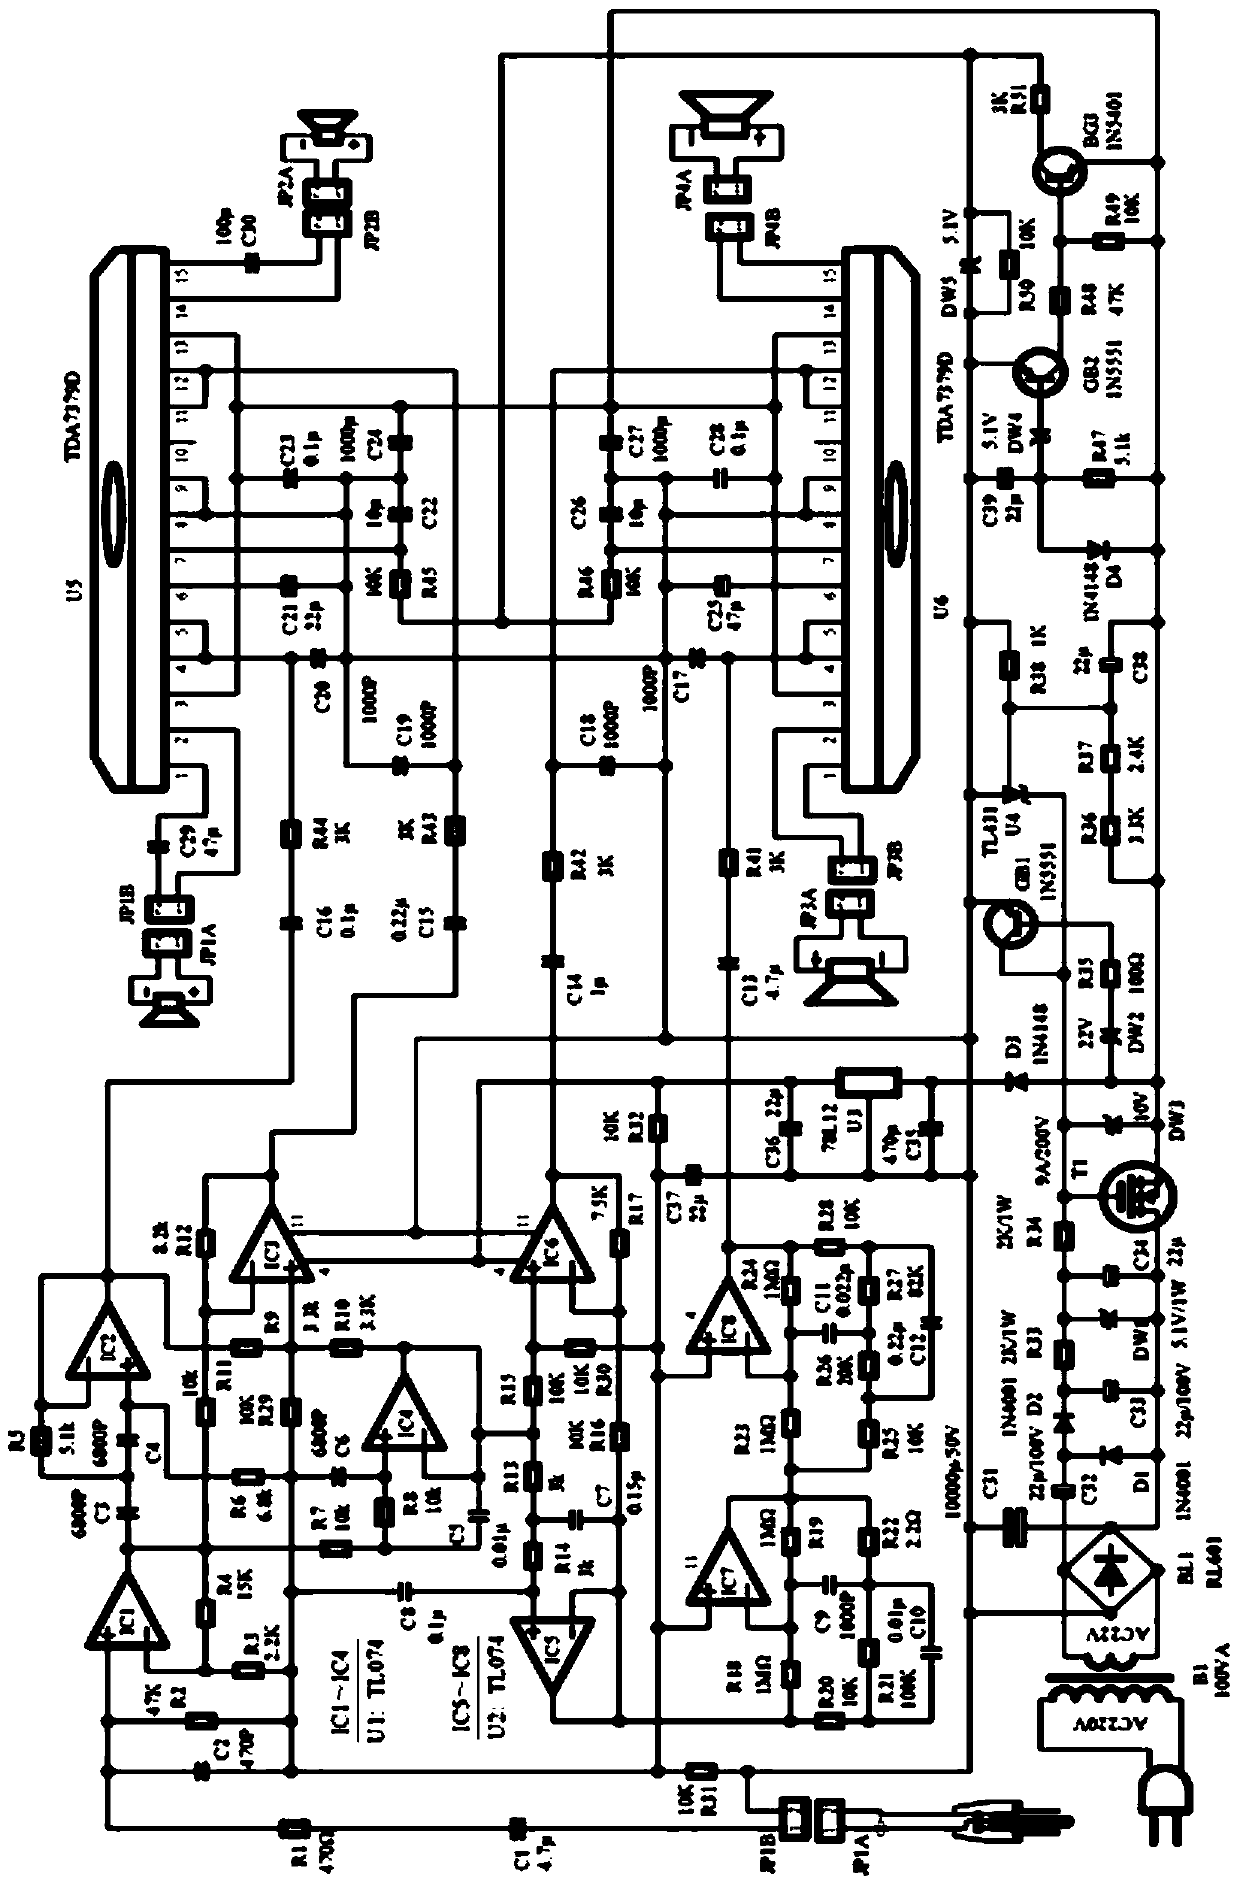 A subtractive electronic four-frequency audio circuit and method